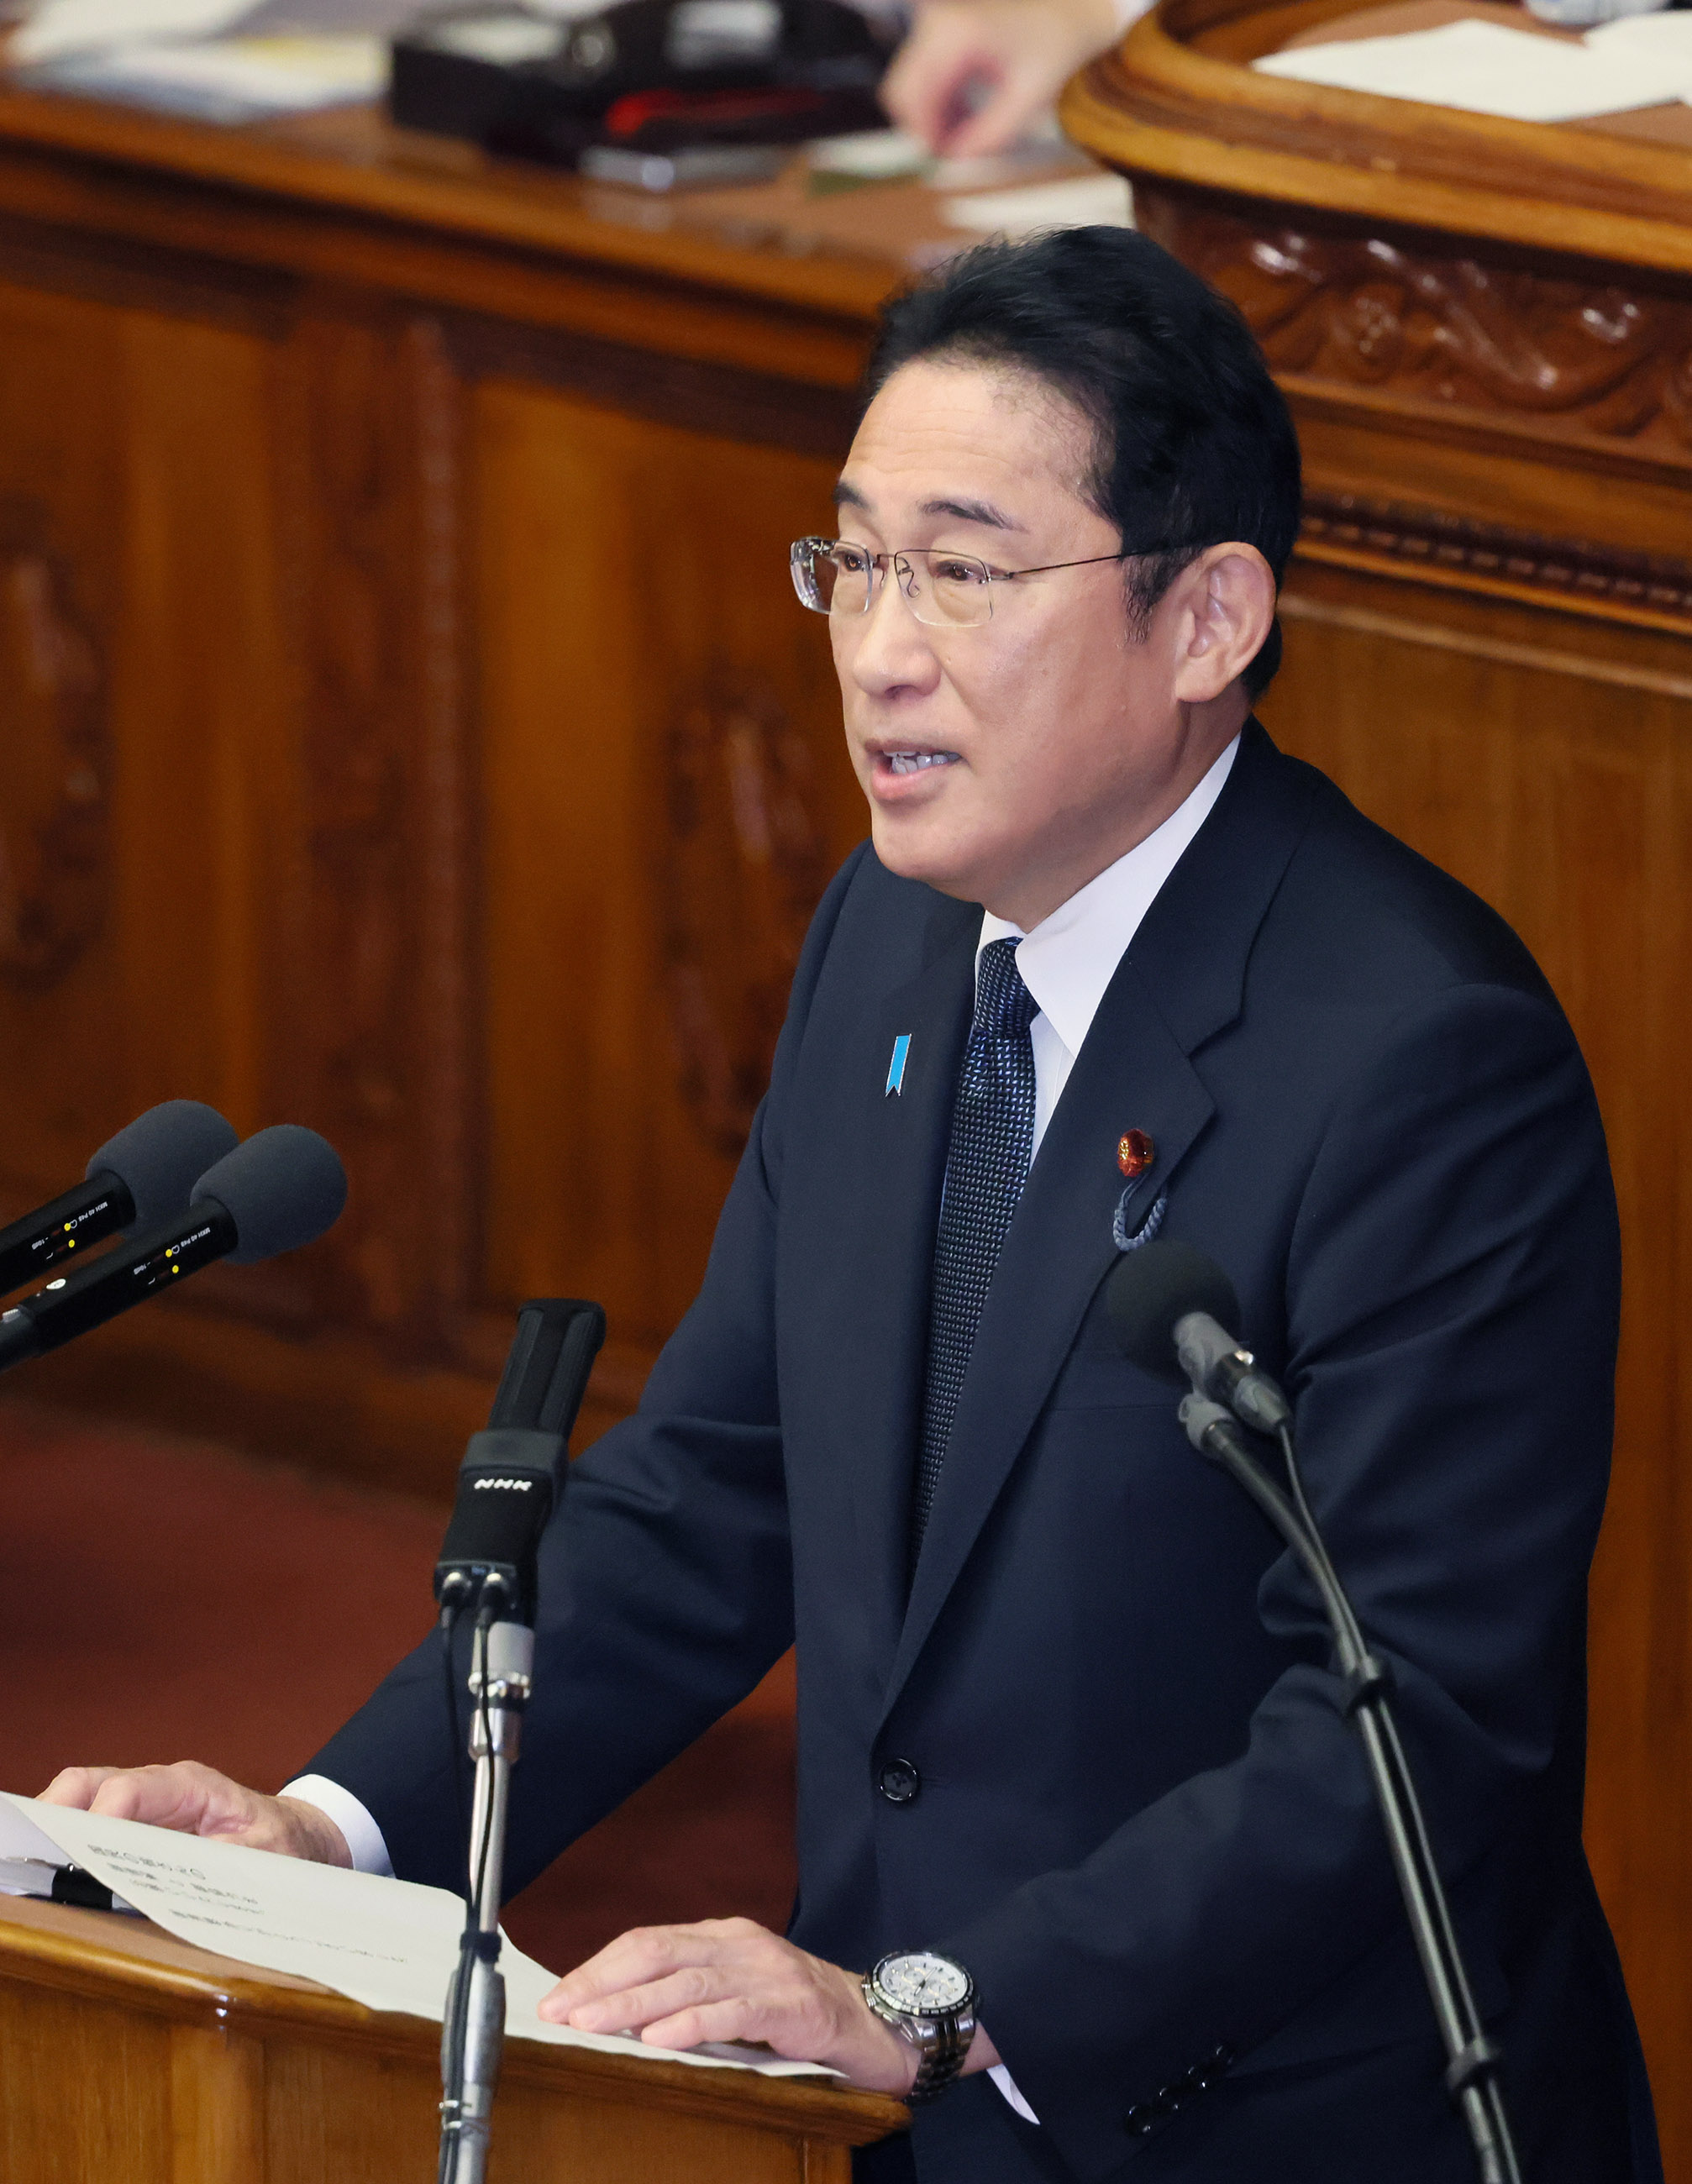 Prime Minister Kishida delivering a policy speech during the plenary session of the House of Representatives (5)